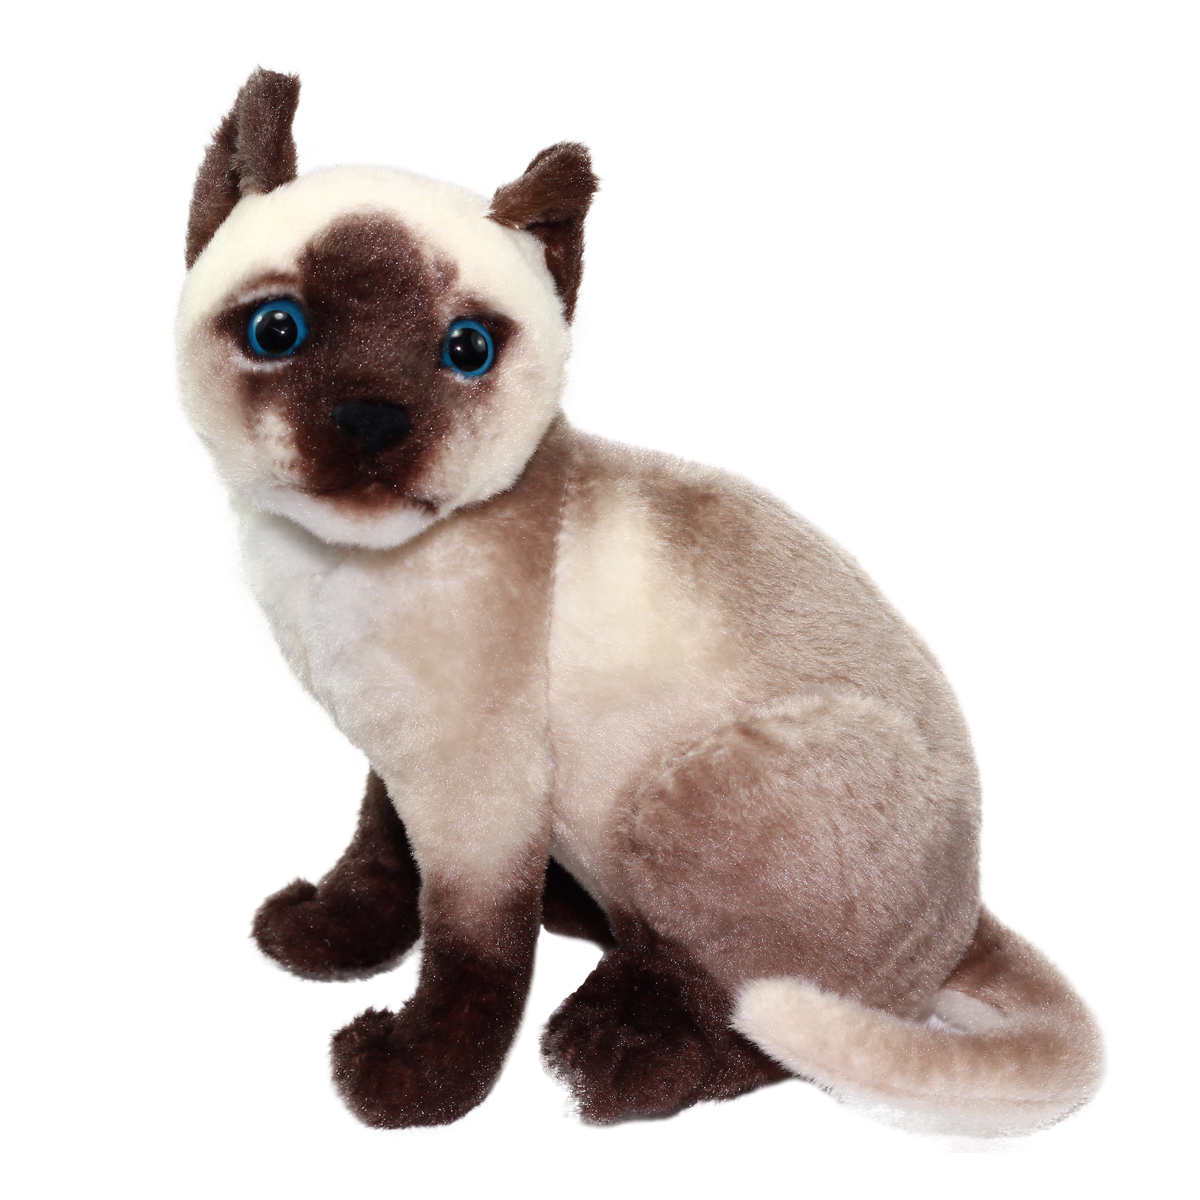 Real Cat Plush Collection Stuffed Animal Toy Brown Siamese Cat 10 Inches